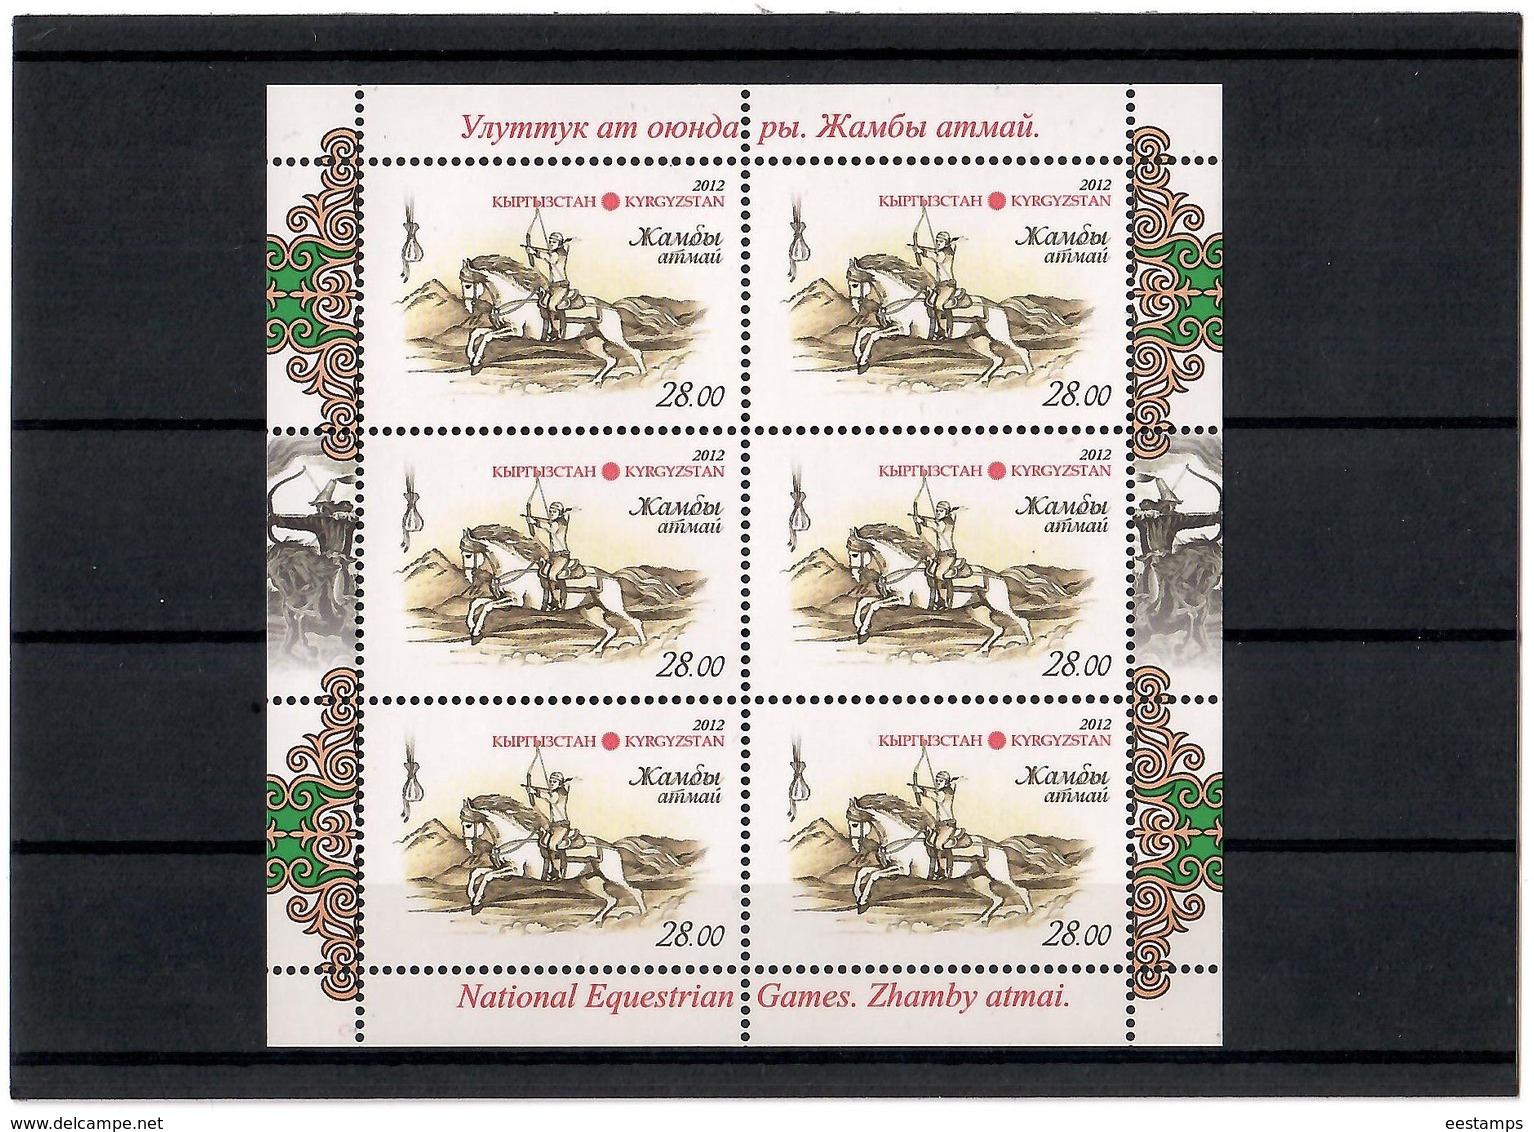 Kyrgyzstan.2012 Equestrian Horse Games. Sheetlet Of 6 Stamps. Michel # 714 KB - Kirghizistan